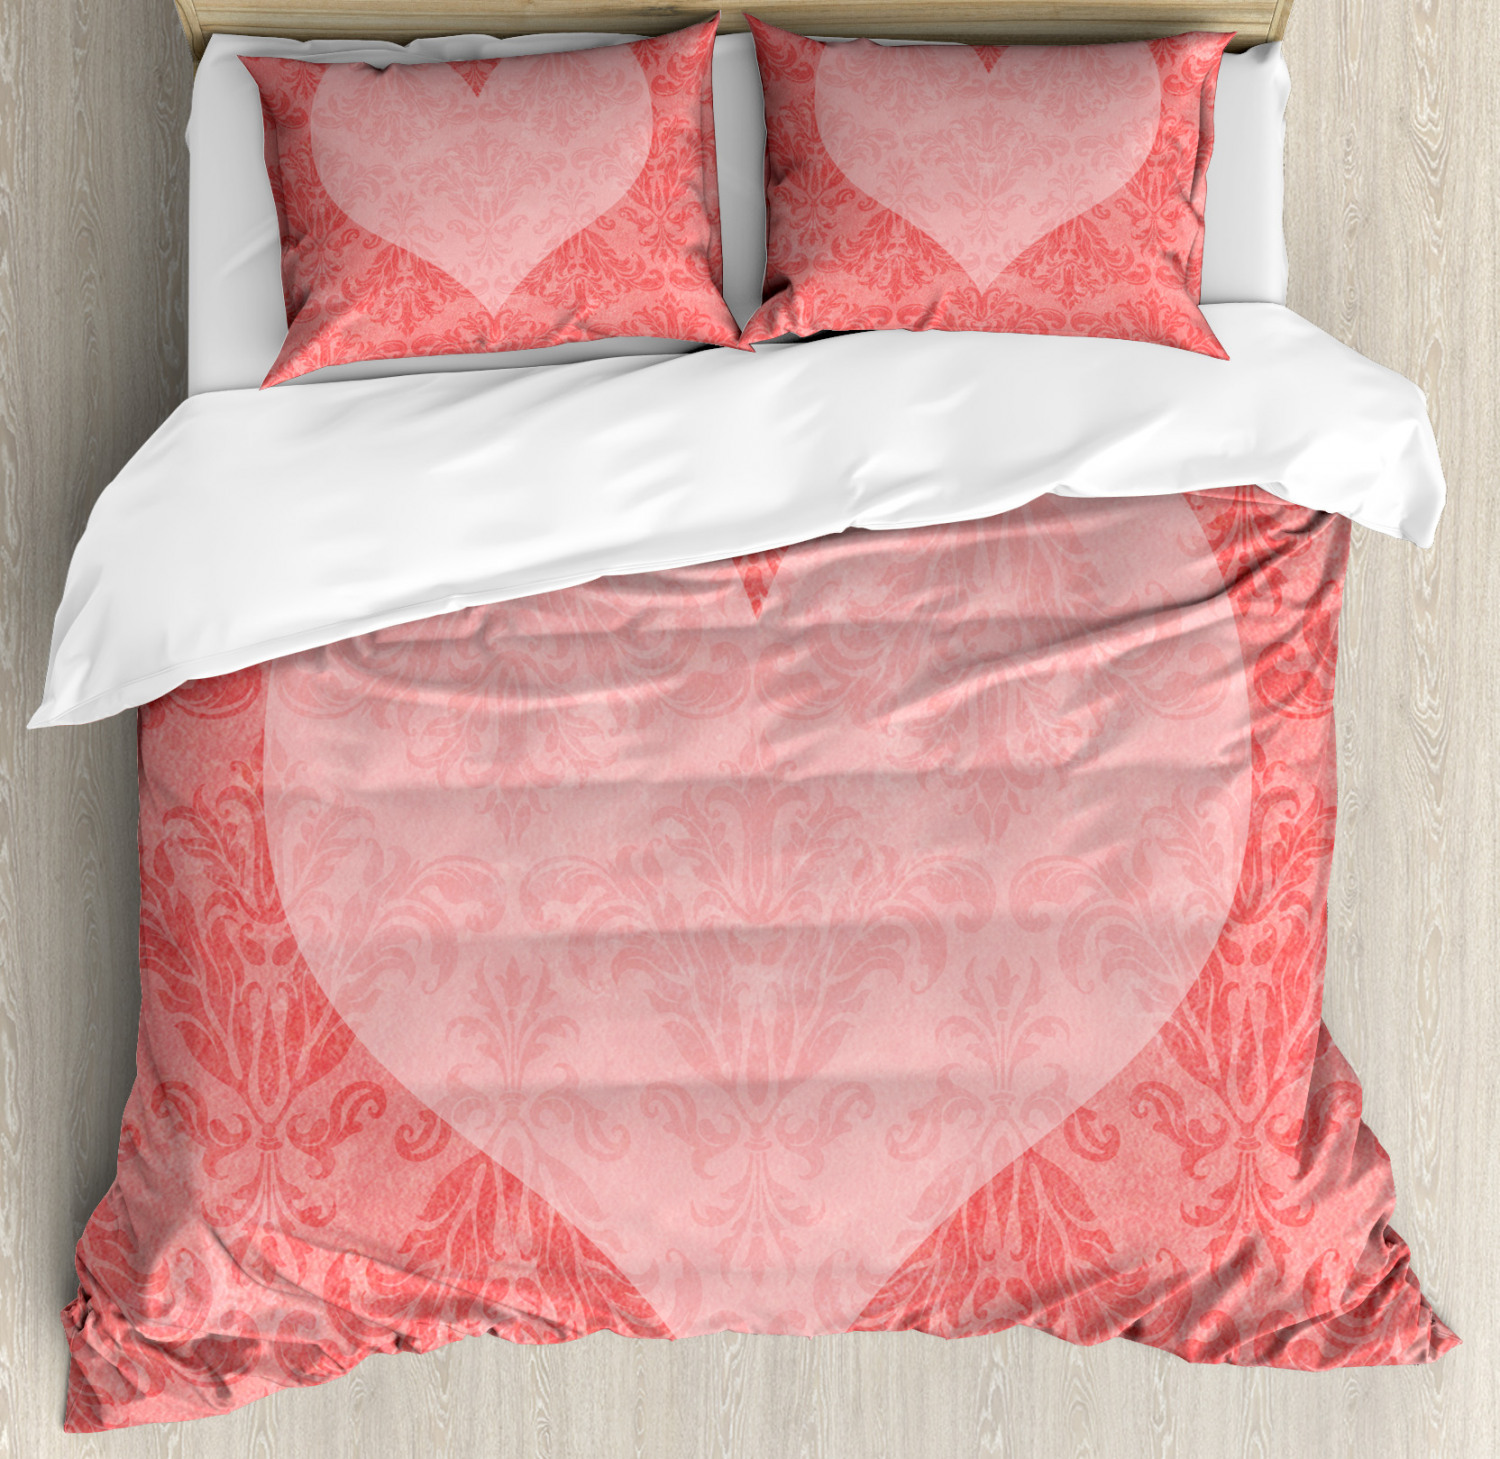 Coral Duvet Cover Set With Pillow Shams Pink Heart Ancient Damask